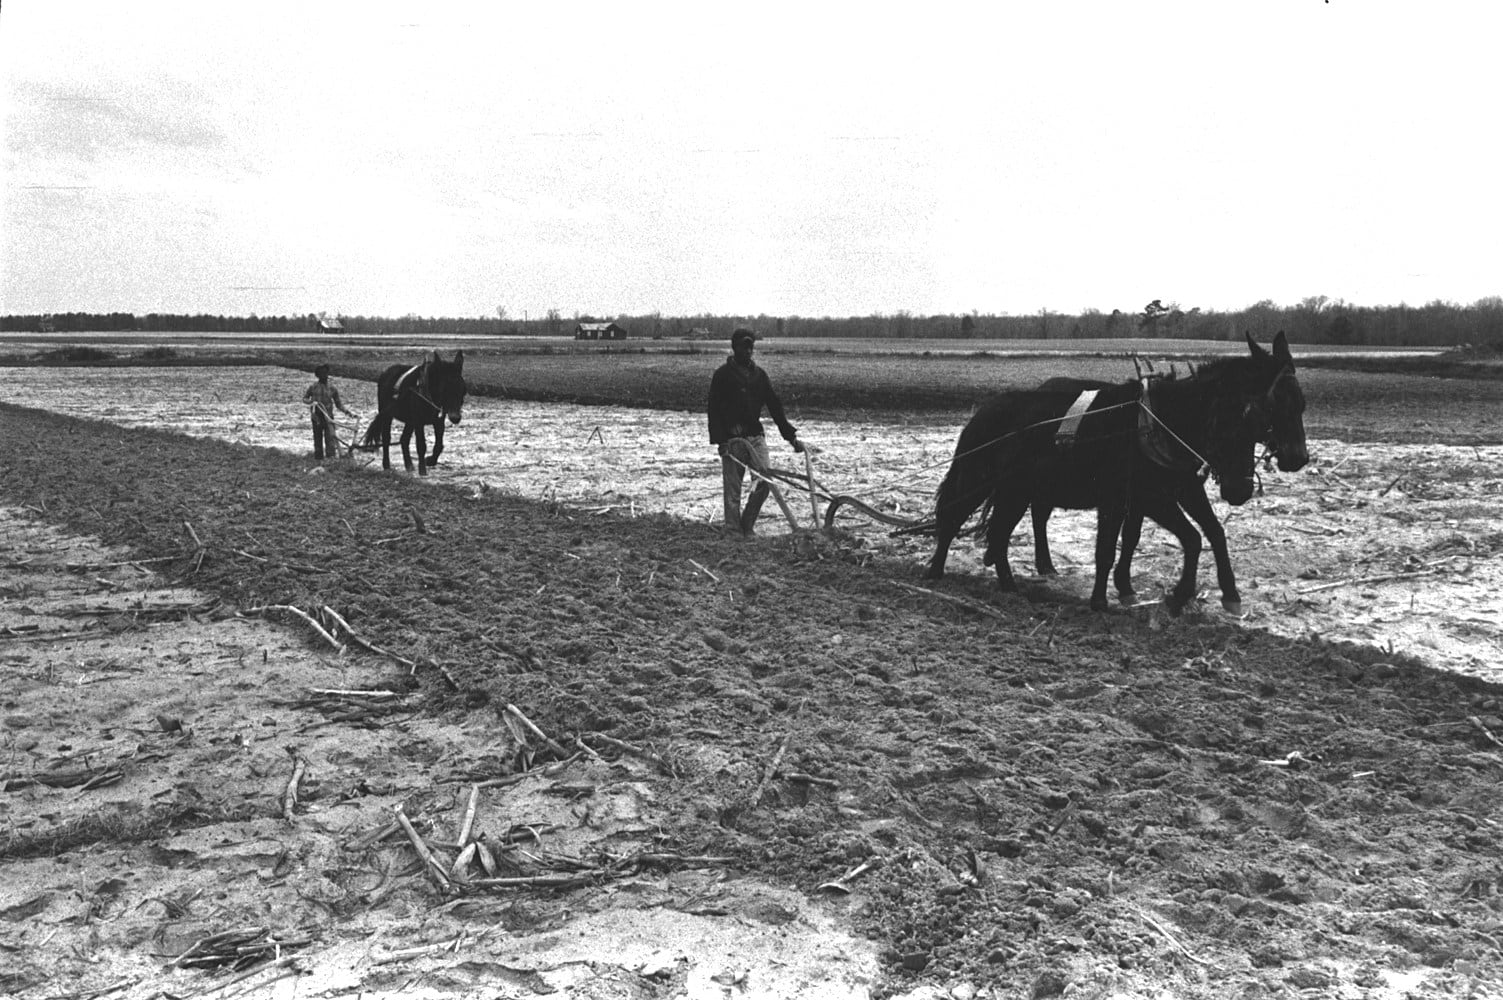 Constantine Manos, Untitled, Sharecroppers, South Carolina (two men and mules plowing), 1965